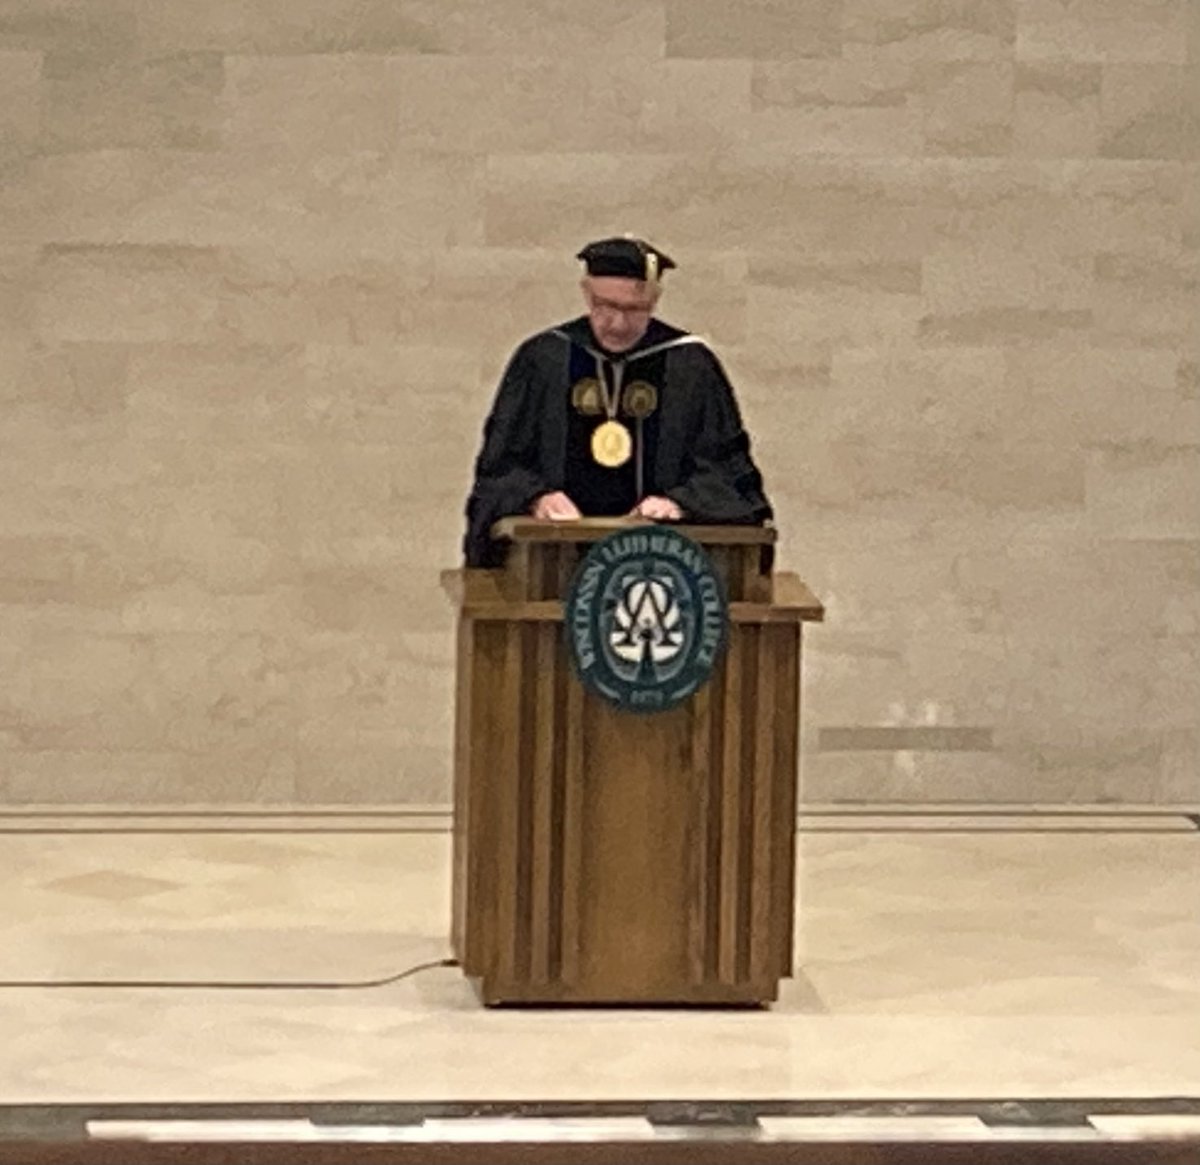 BTT May 2: Scholarships, awards & hardware at the @InsideWLC Honors Convocation! Pics: Keynote: Dr. Ned Farley Best Dressed: Dr. Jeremy Zima (the red pops!) ⁦@WLCCoachNoon⁩ gives Senior Athlete Award to @leximartin03 & ⁦@ryanbroeckel45⁩ Medallion: ⁦@wlcprez⁩ 😀